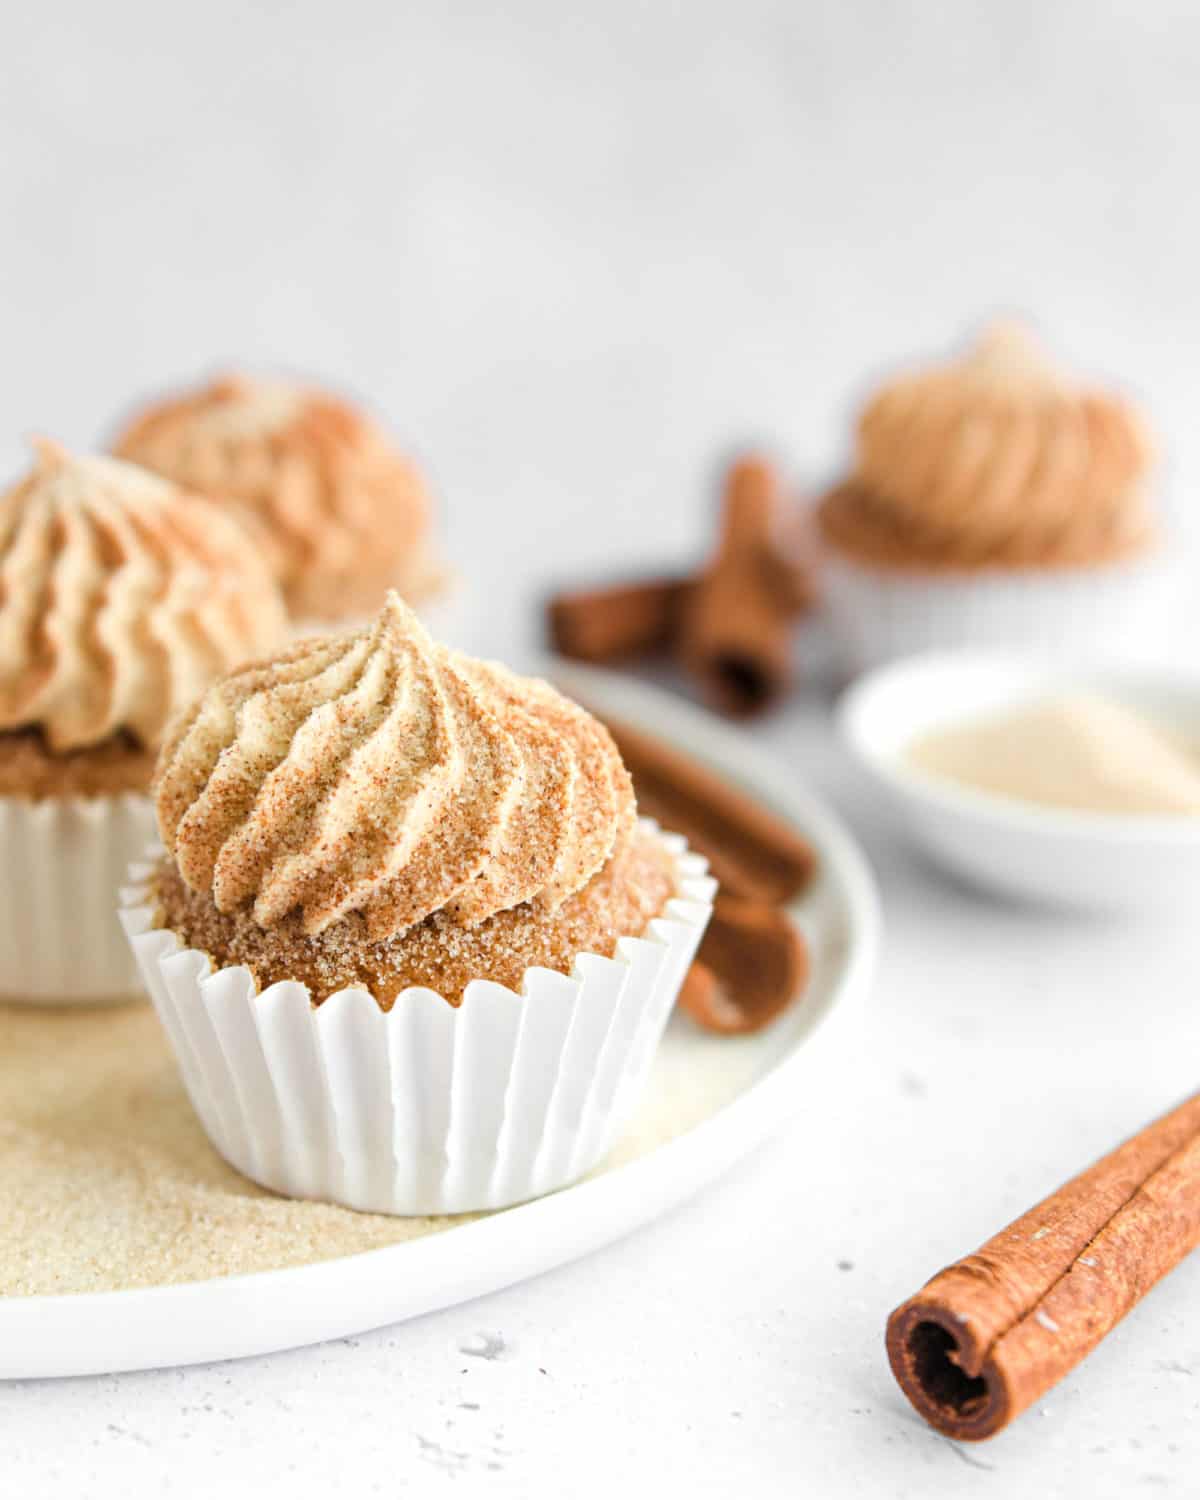 Buttercream frosting on a cinnamon cupcake.